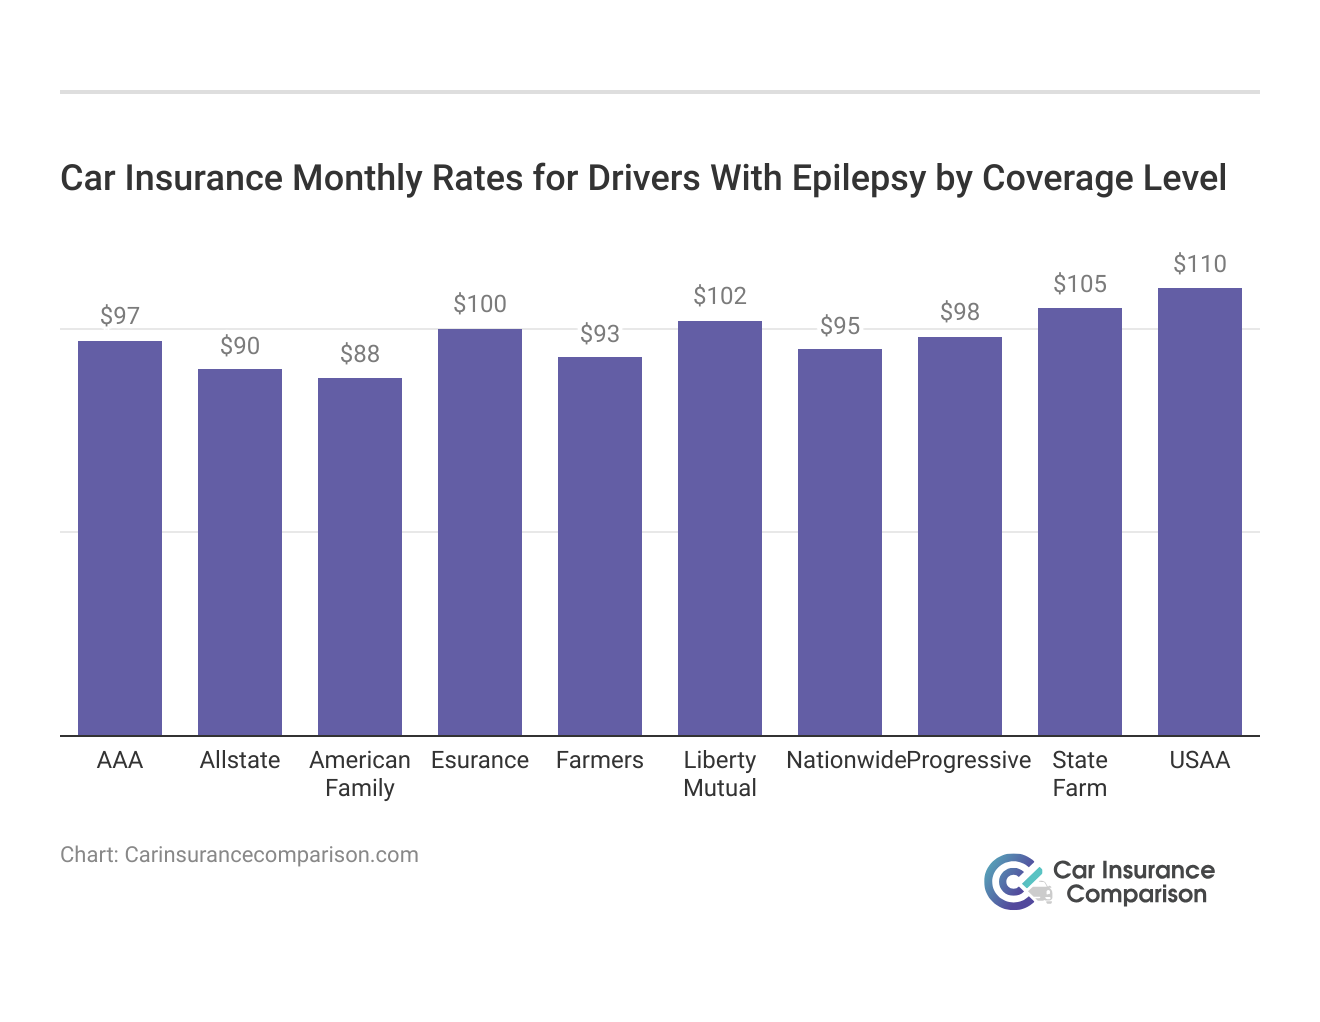 <h3>Car Insurance Monthly Rates for Drivers With Epilepsy by Coverage Level</h3>